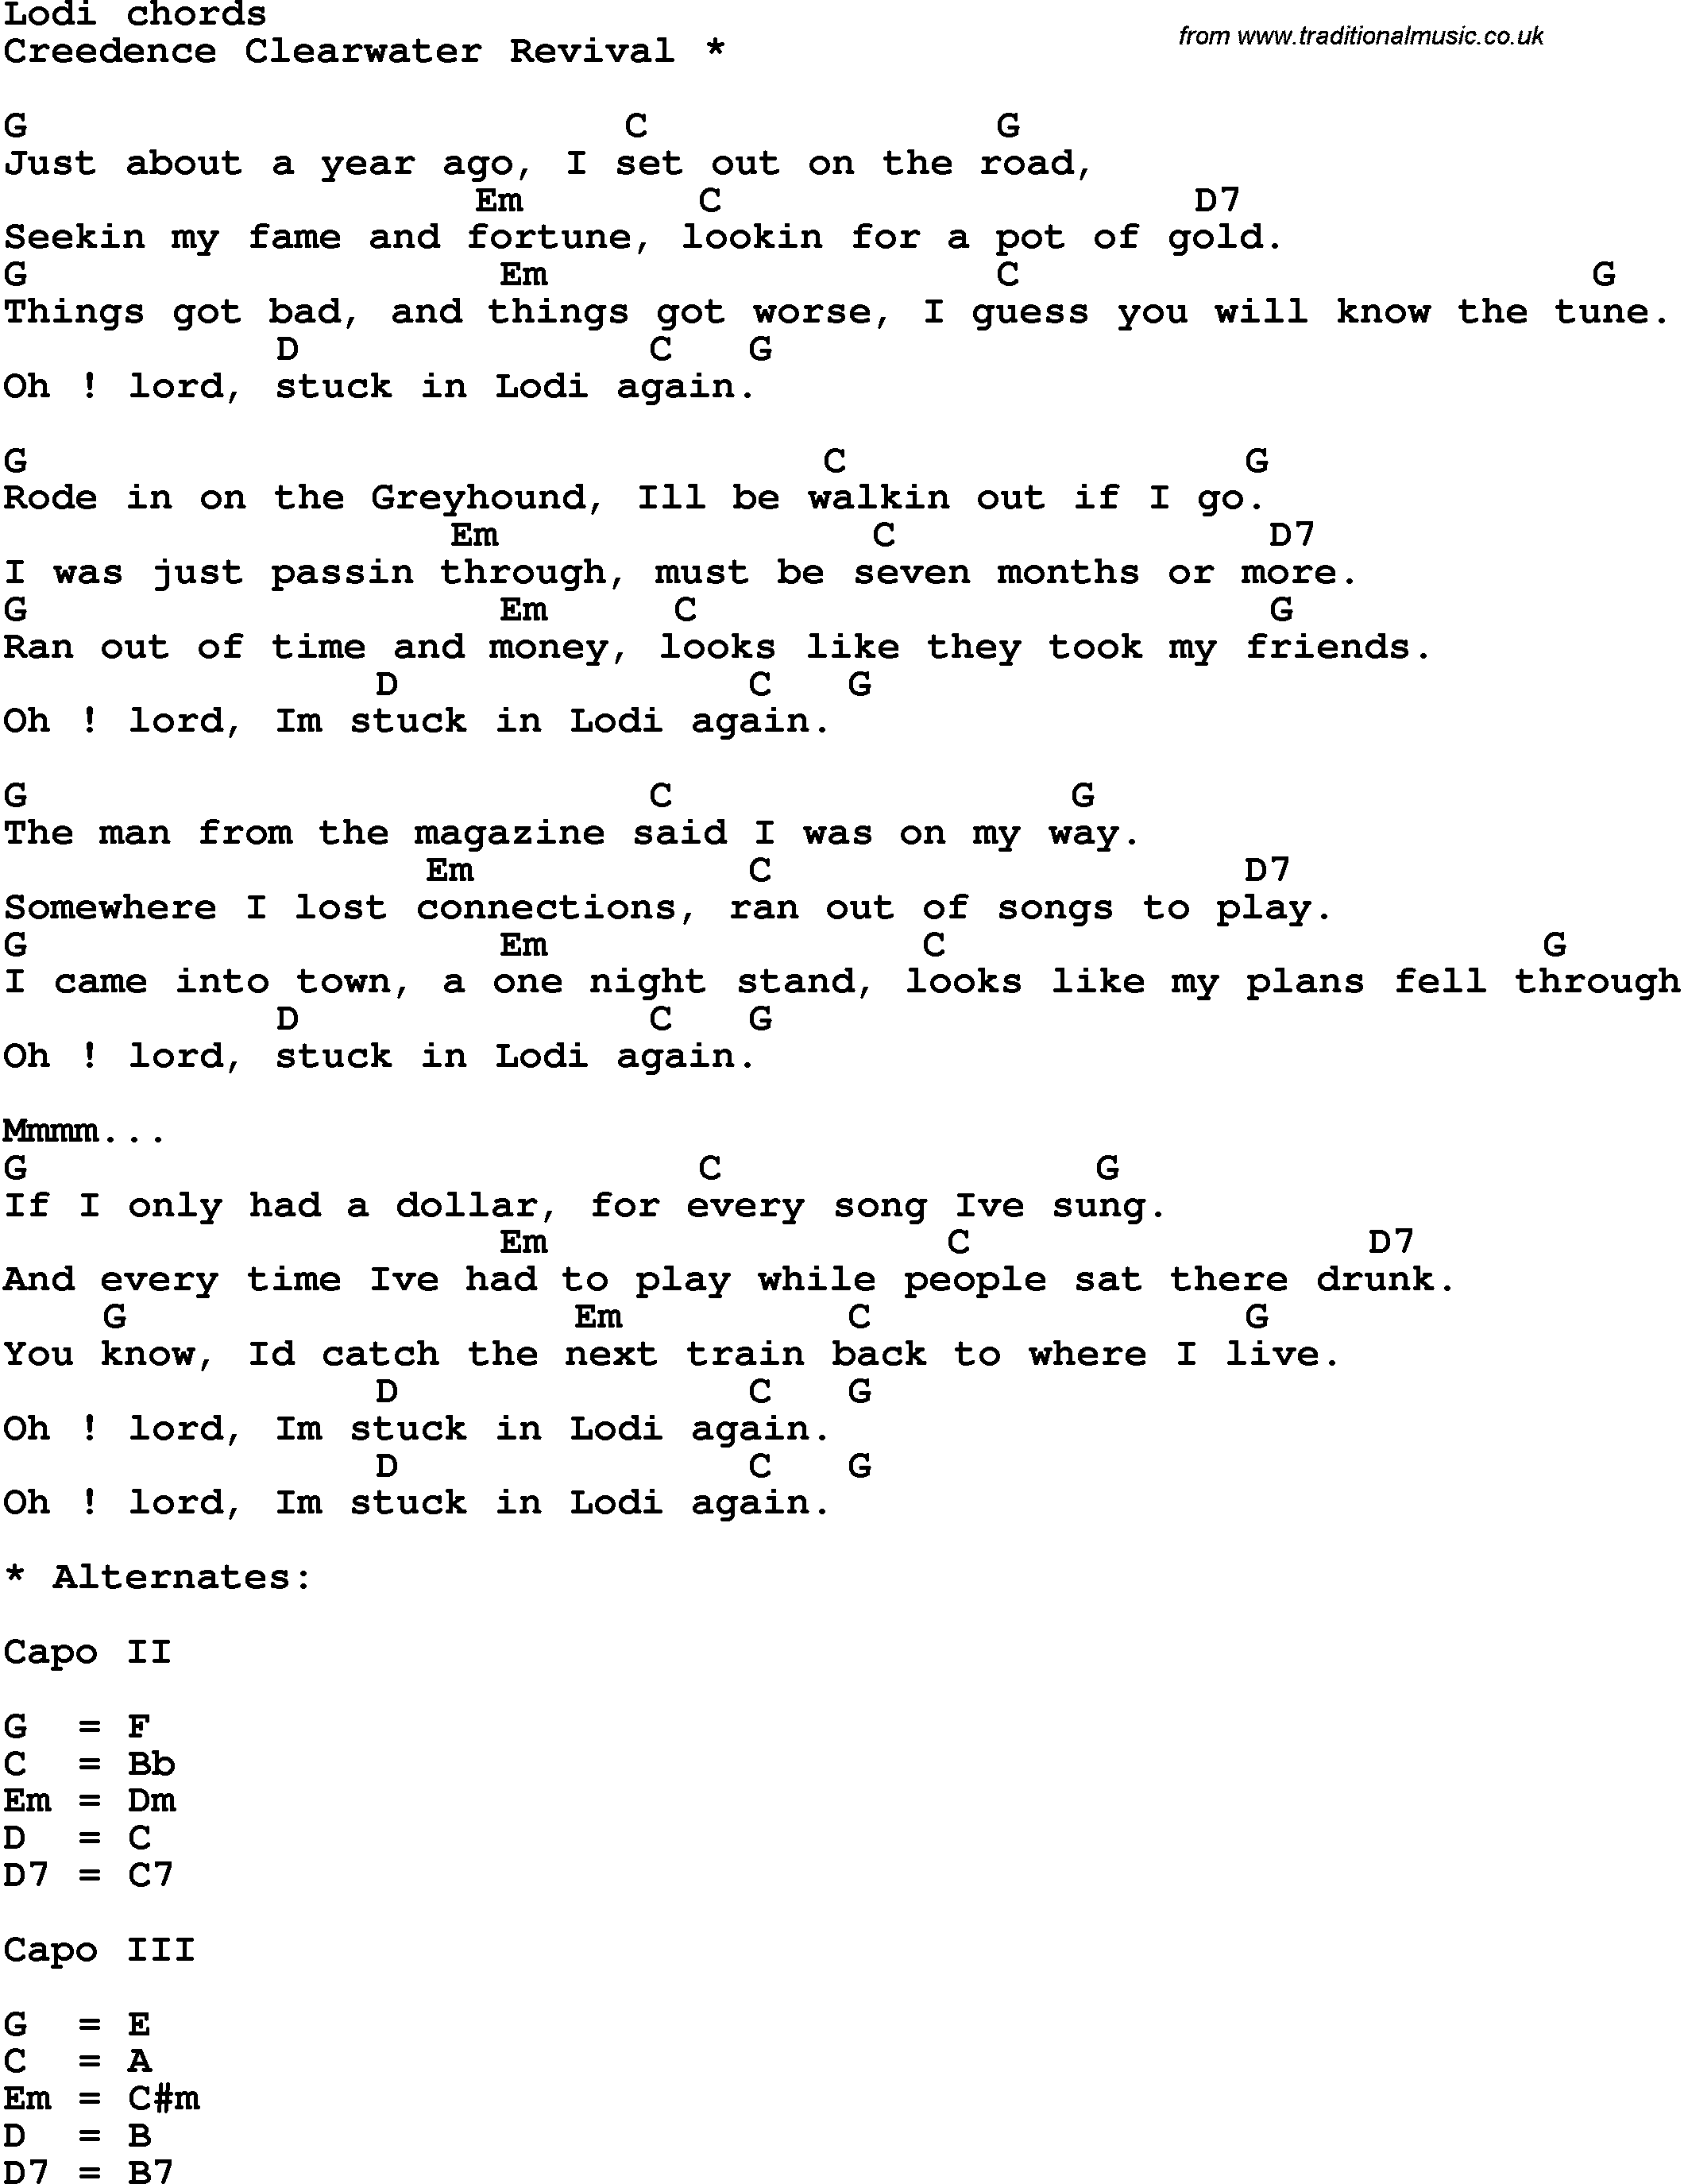 Song Lyrics with guitar chords for Lodi - Creedence Clearwater Revival